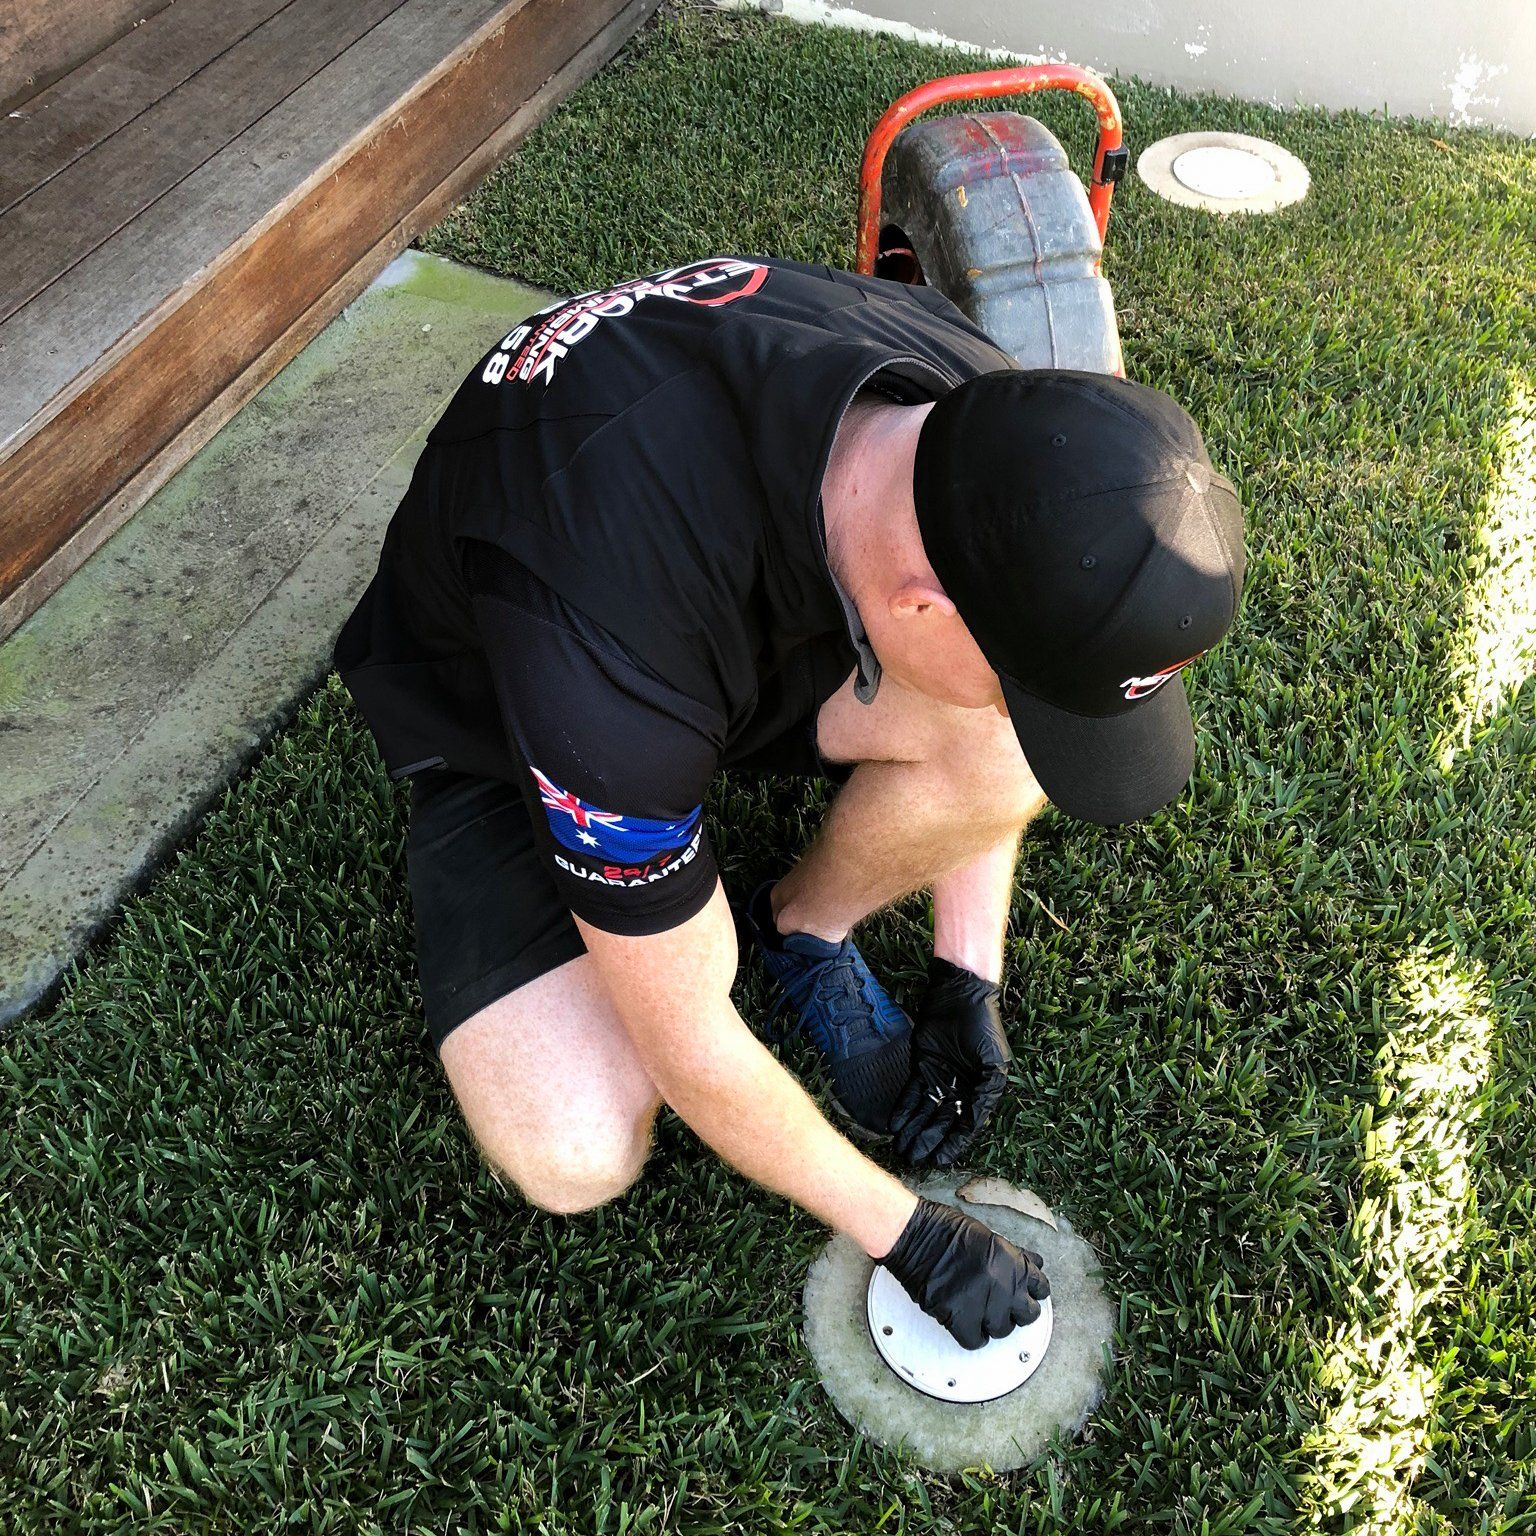 Network Plumbing plumber inspecting a blocked sewer line